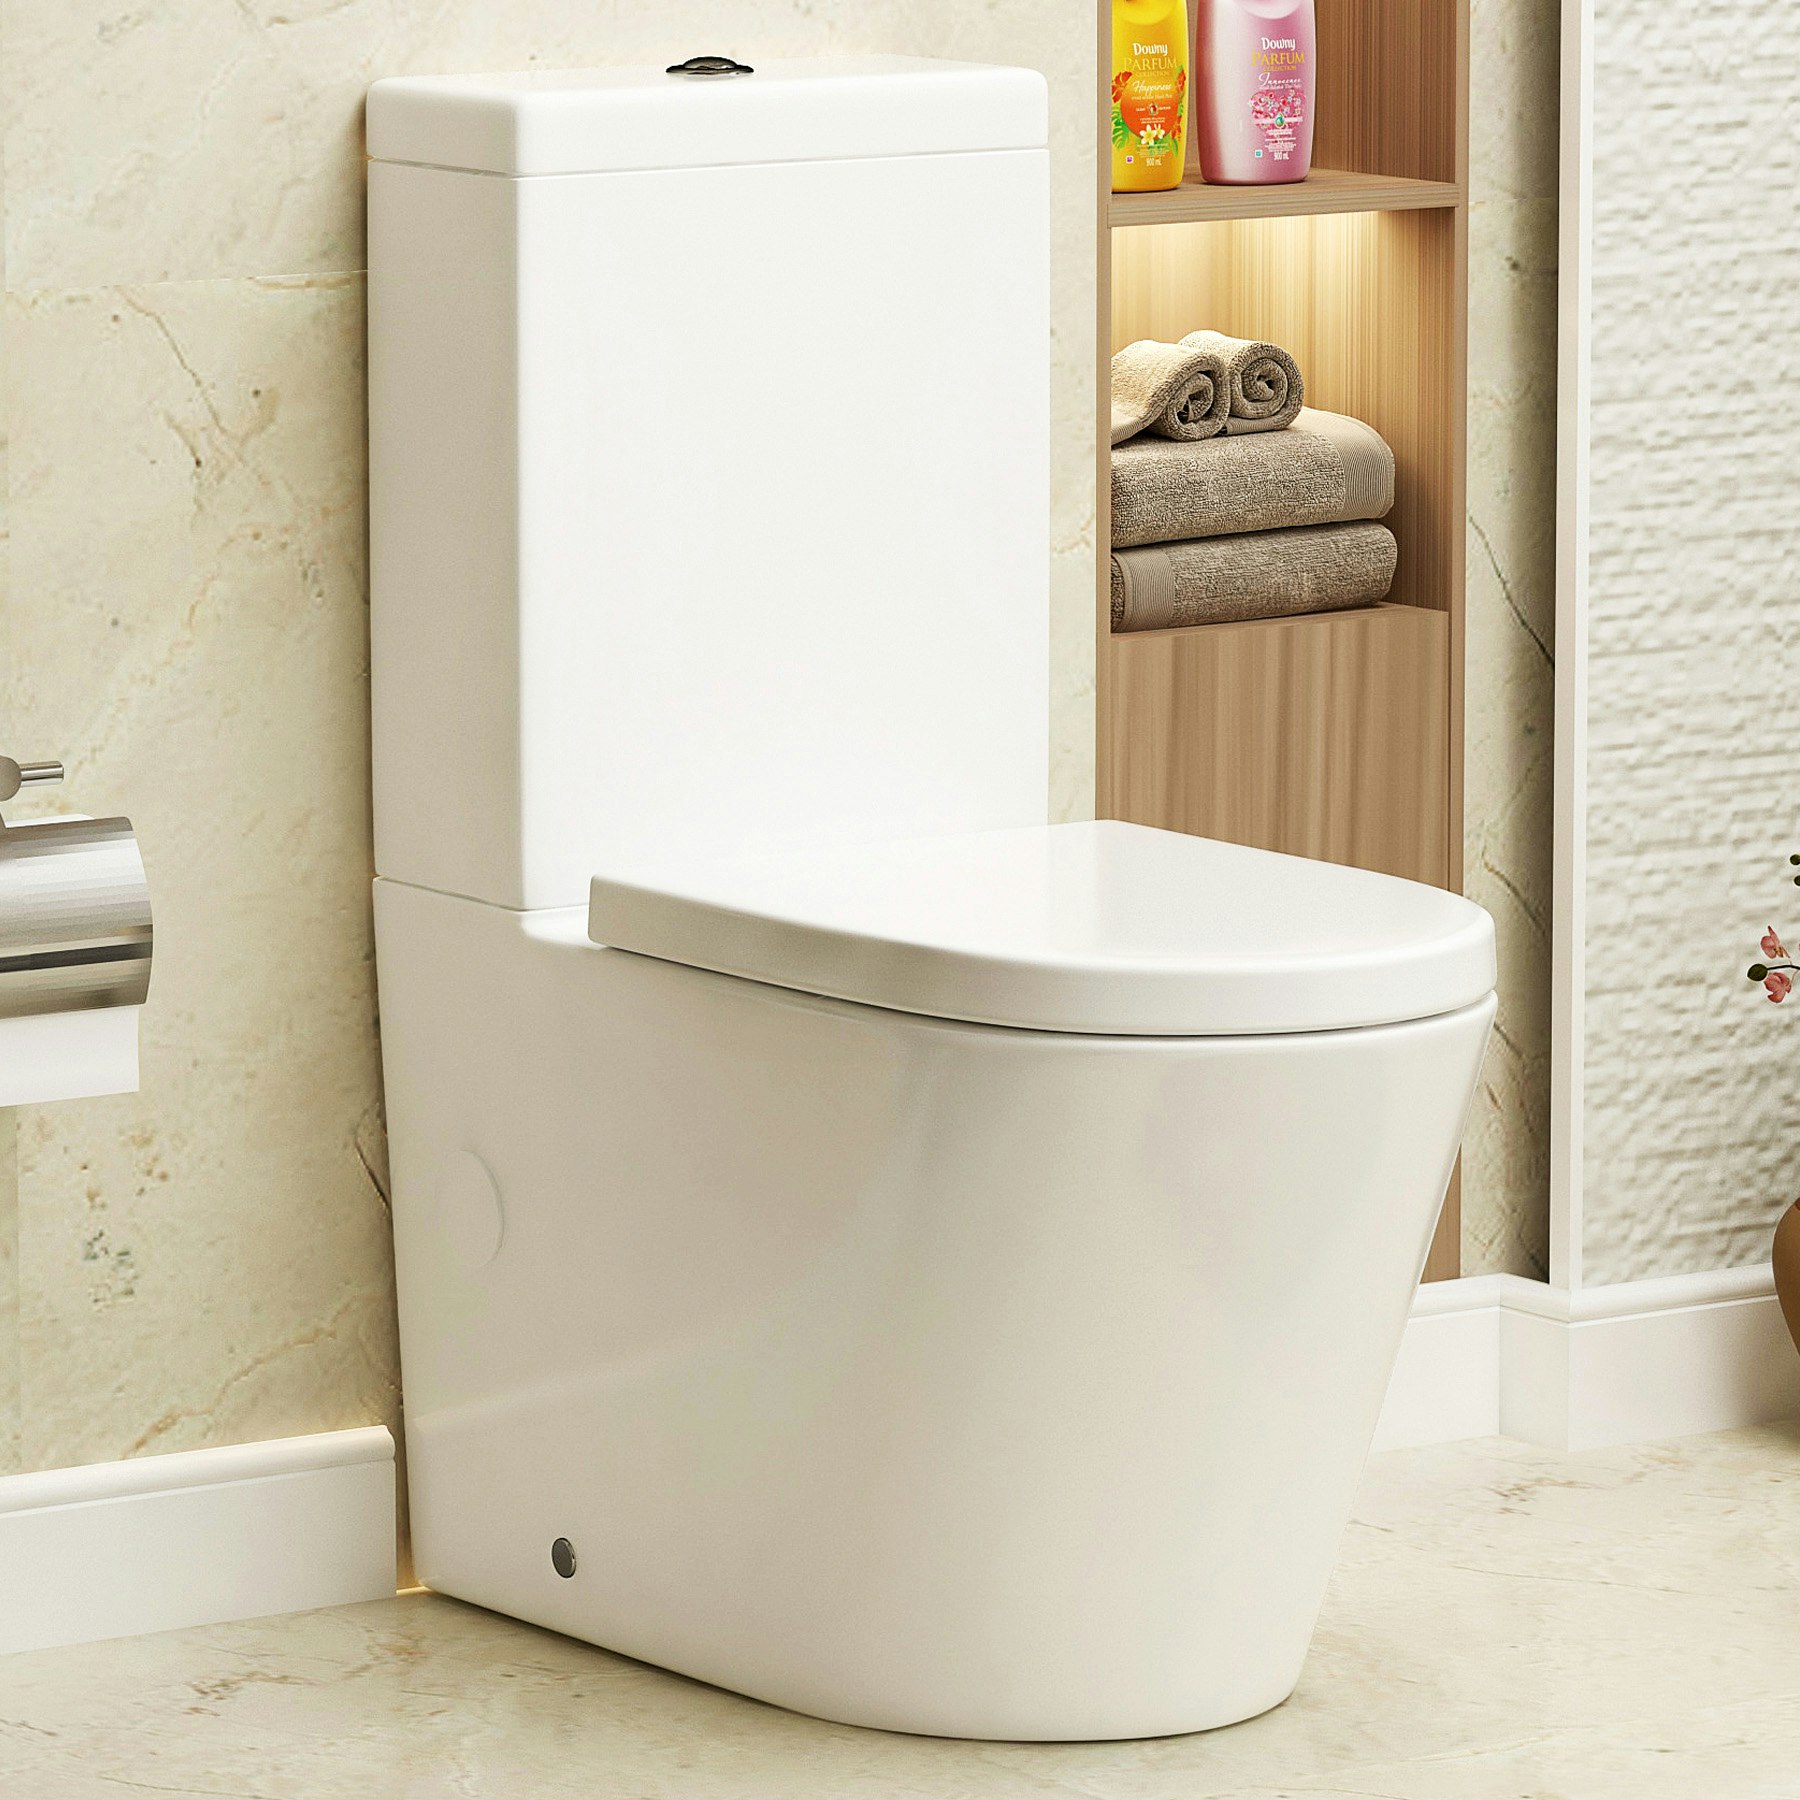 https://images.royalbathrooms.co.uk/catalog/product/c/l/close-coupled-toilet-cwc800-render.jpg?auto=format&fill=solid&fit=fill&fill-color=FFFFFF